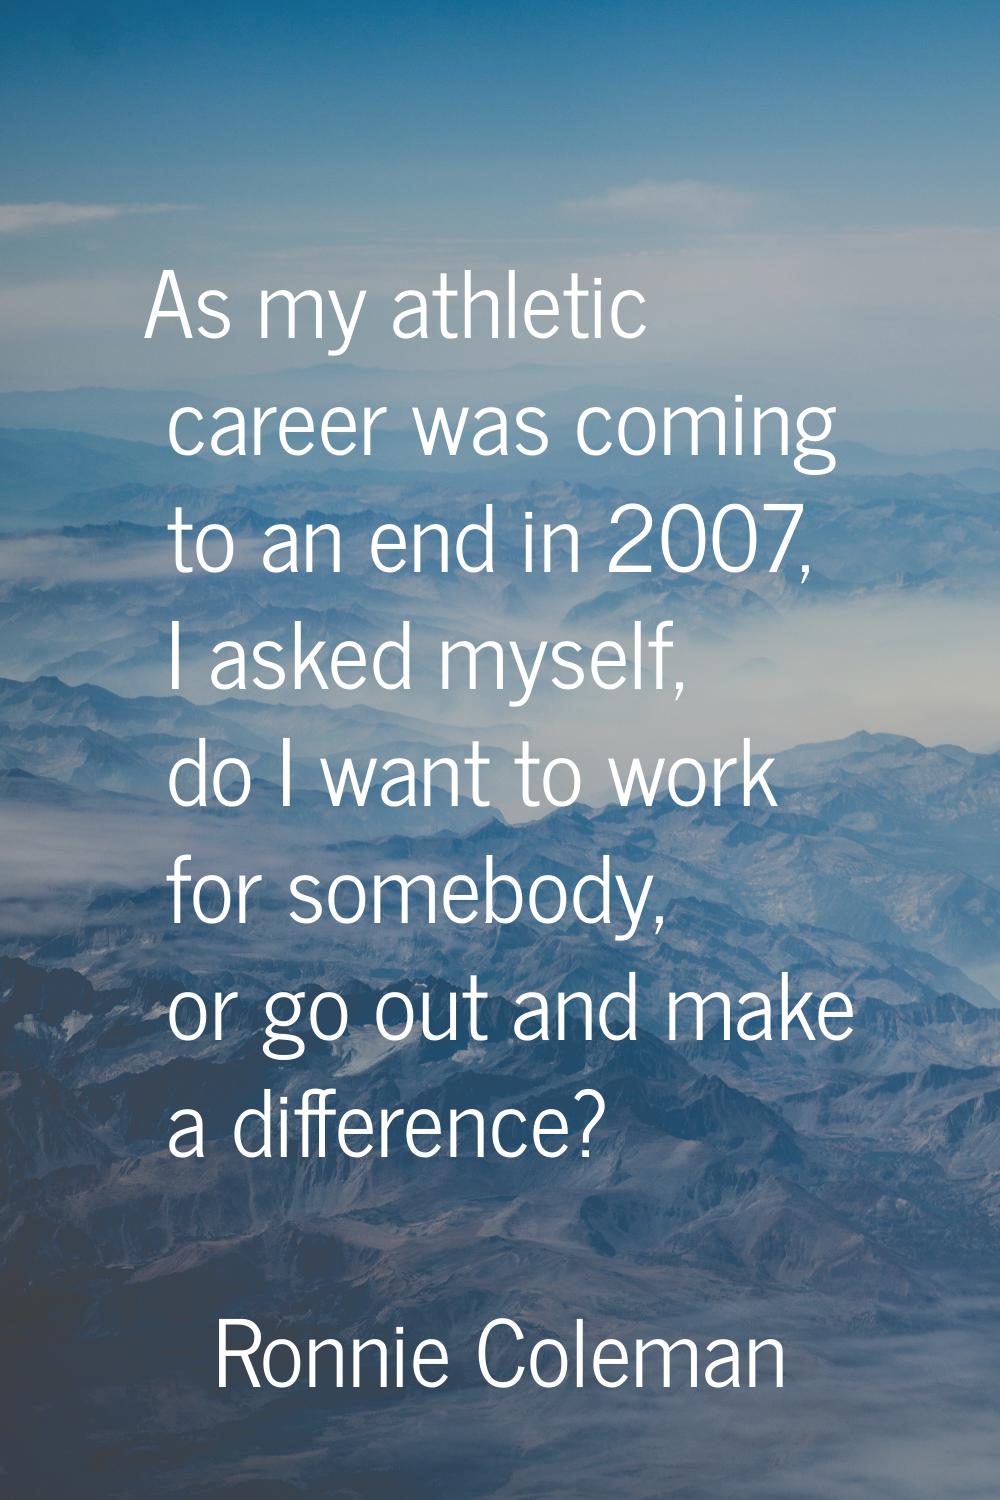 As my athletic career was coming to an end in 2007, I asked myself, do I want to work for somebody,